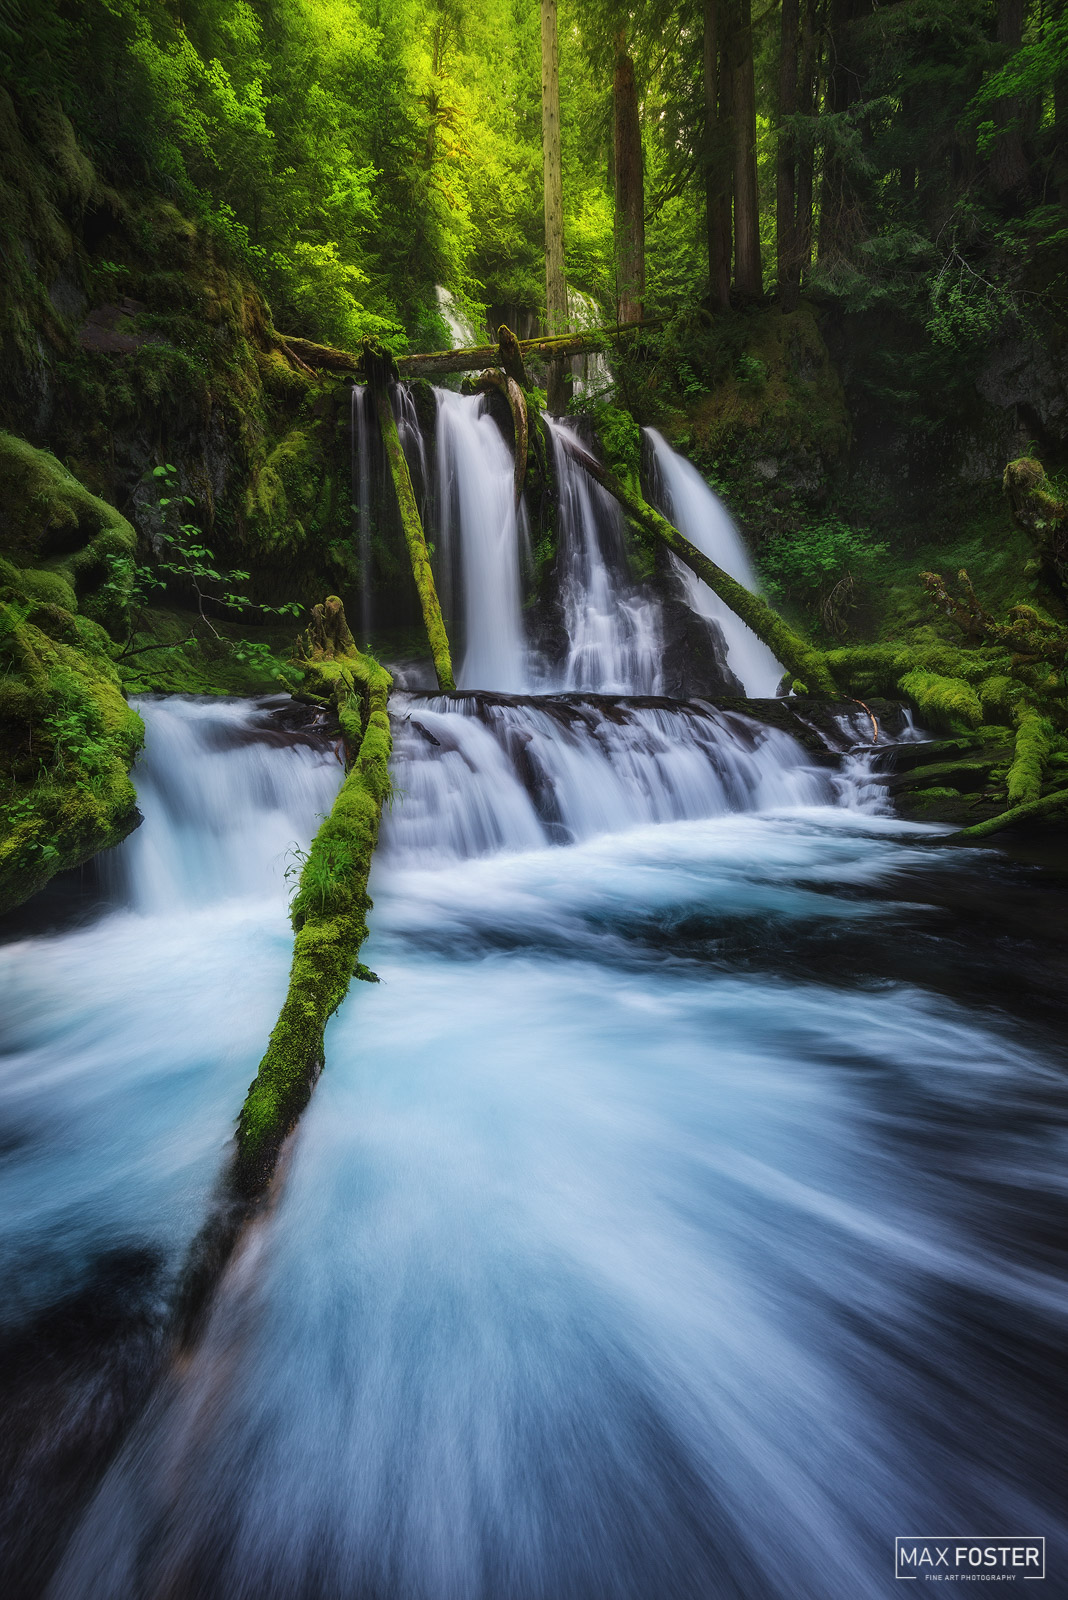 Elevate your space with Frigid Panther, Max Foster's limited edition photography print of Lower Panther Creek Falls in Washington...